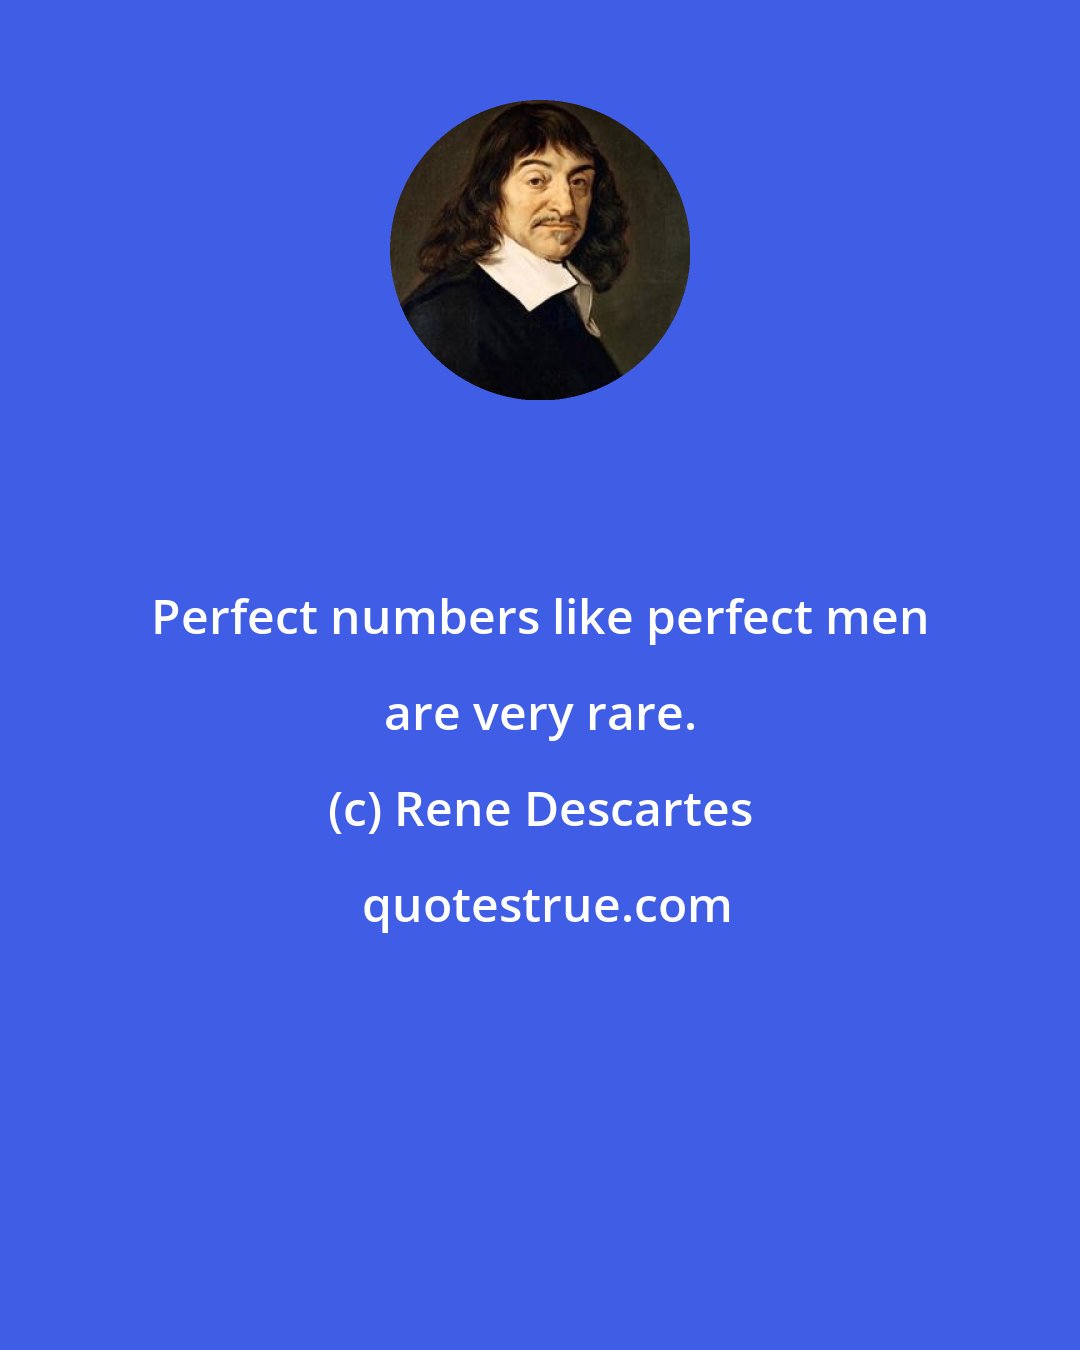 Rene Descartes: Perfect numbers like perfect men are very rare.